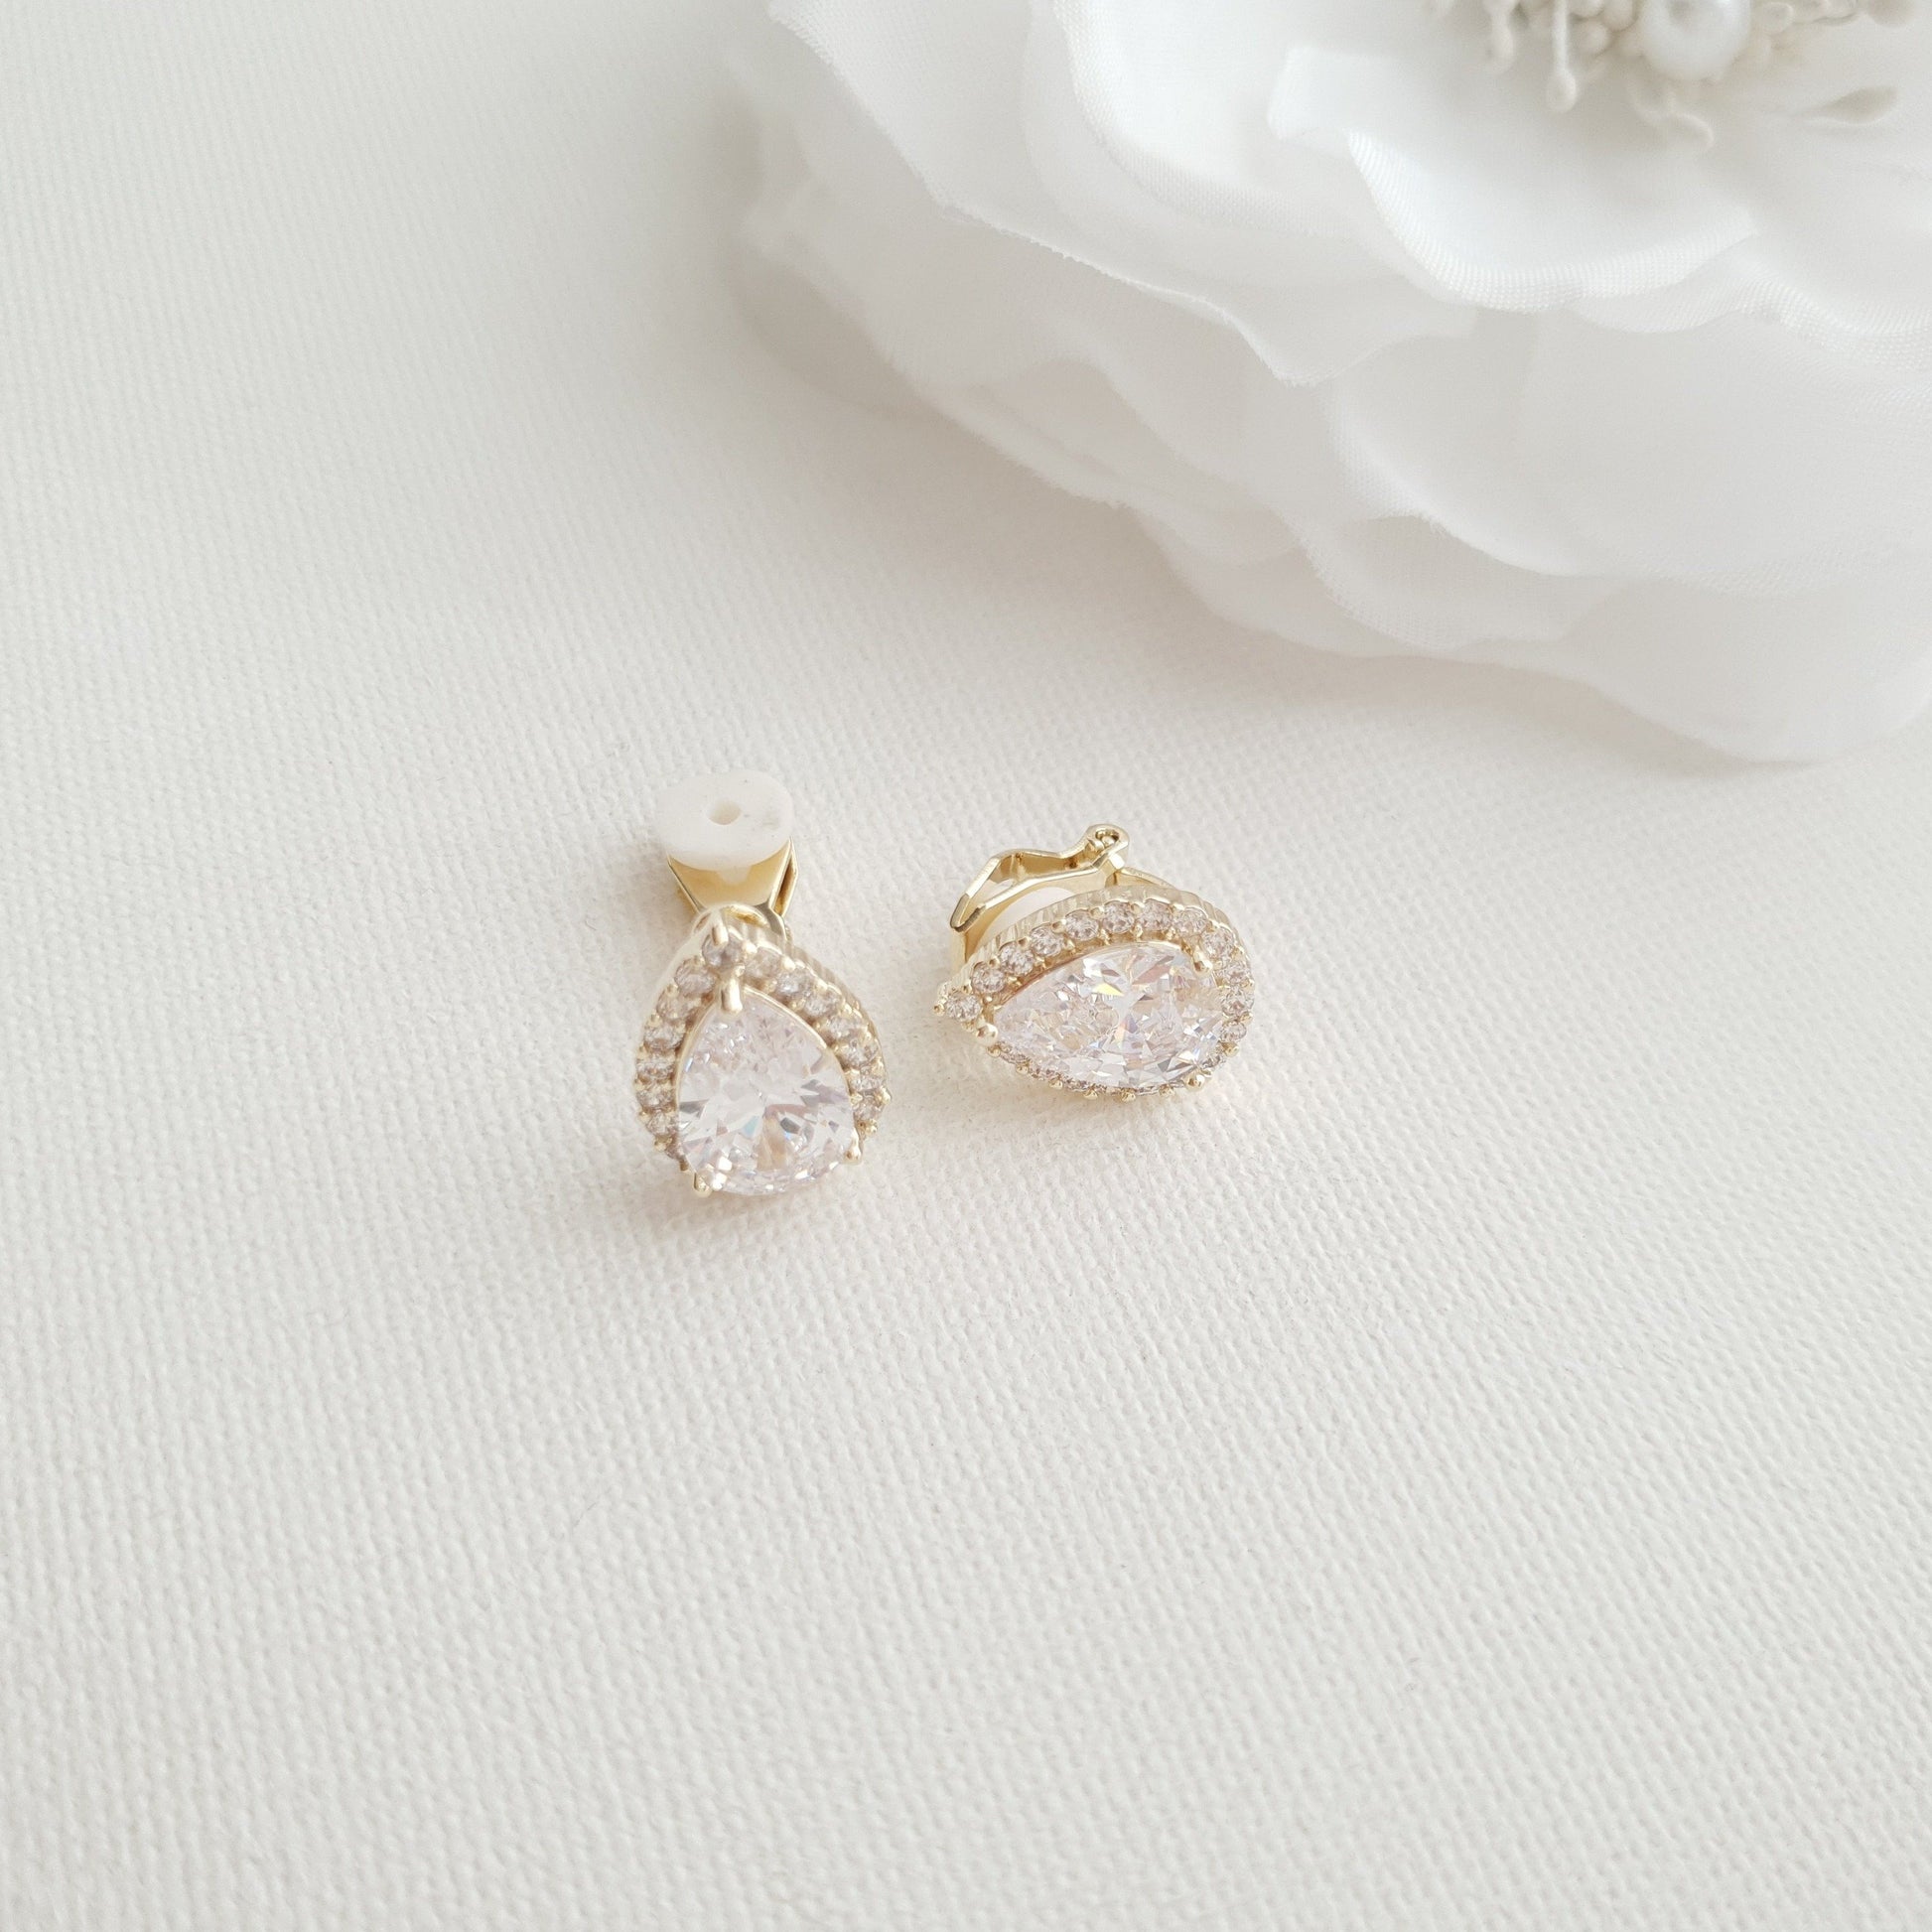 Gold Clip On Earrings in Teardrop CZ for Brides Bridesmaids- Poetry Designs